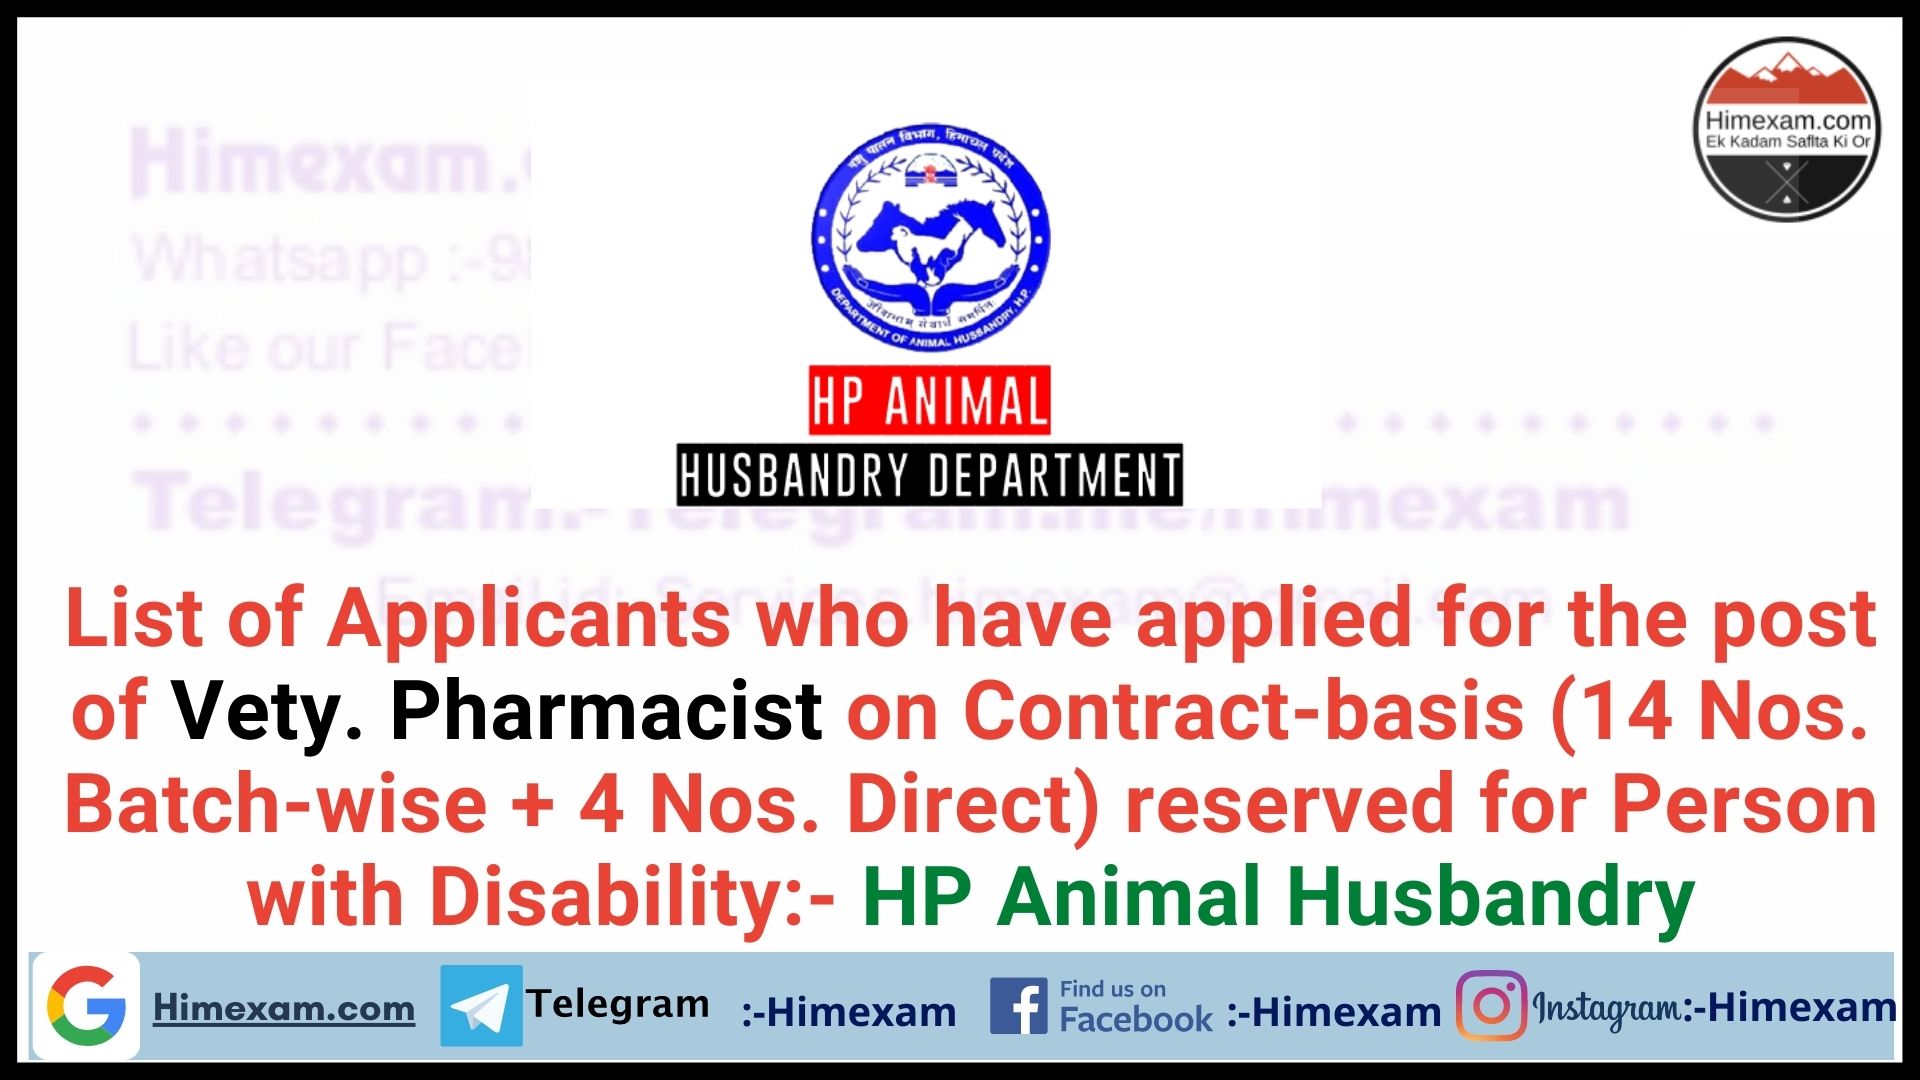 List of Applicants who have applied for the post of Vety. Pharmacist on Contract-basis (14 Nos. Batch-wise + 4 Nos. Direct) reserved for Person with Disability:- HP Animal Husbandry